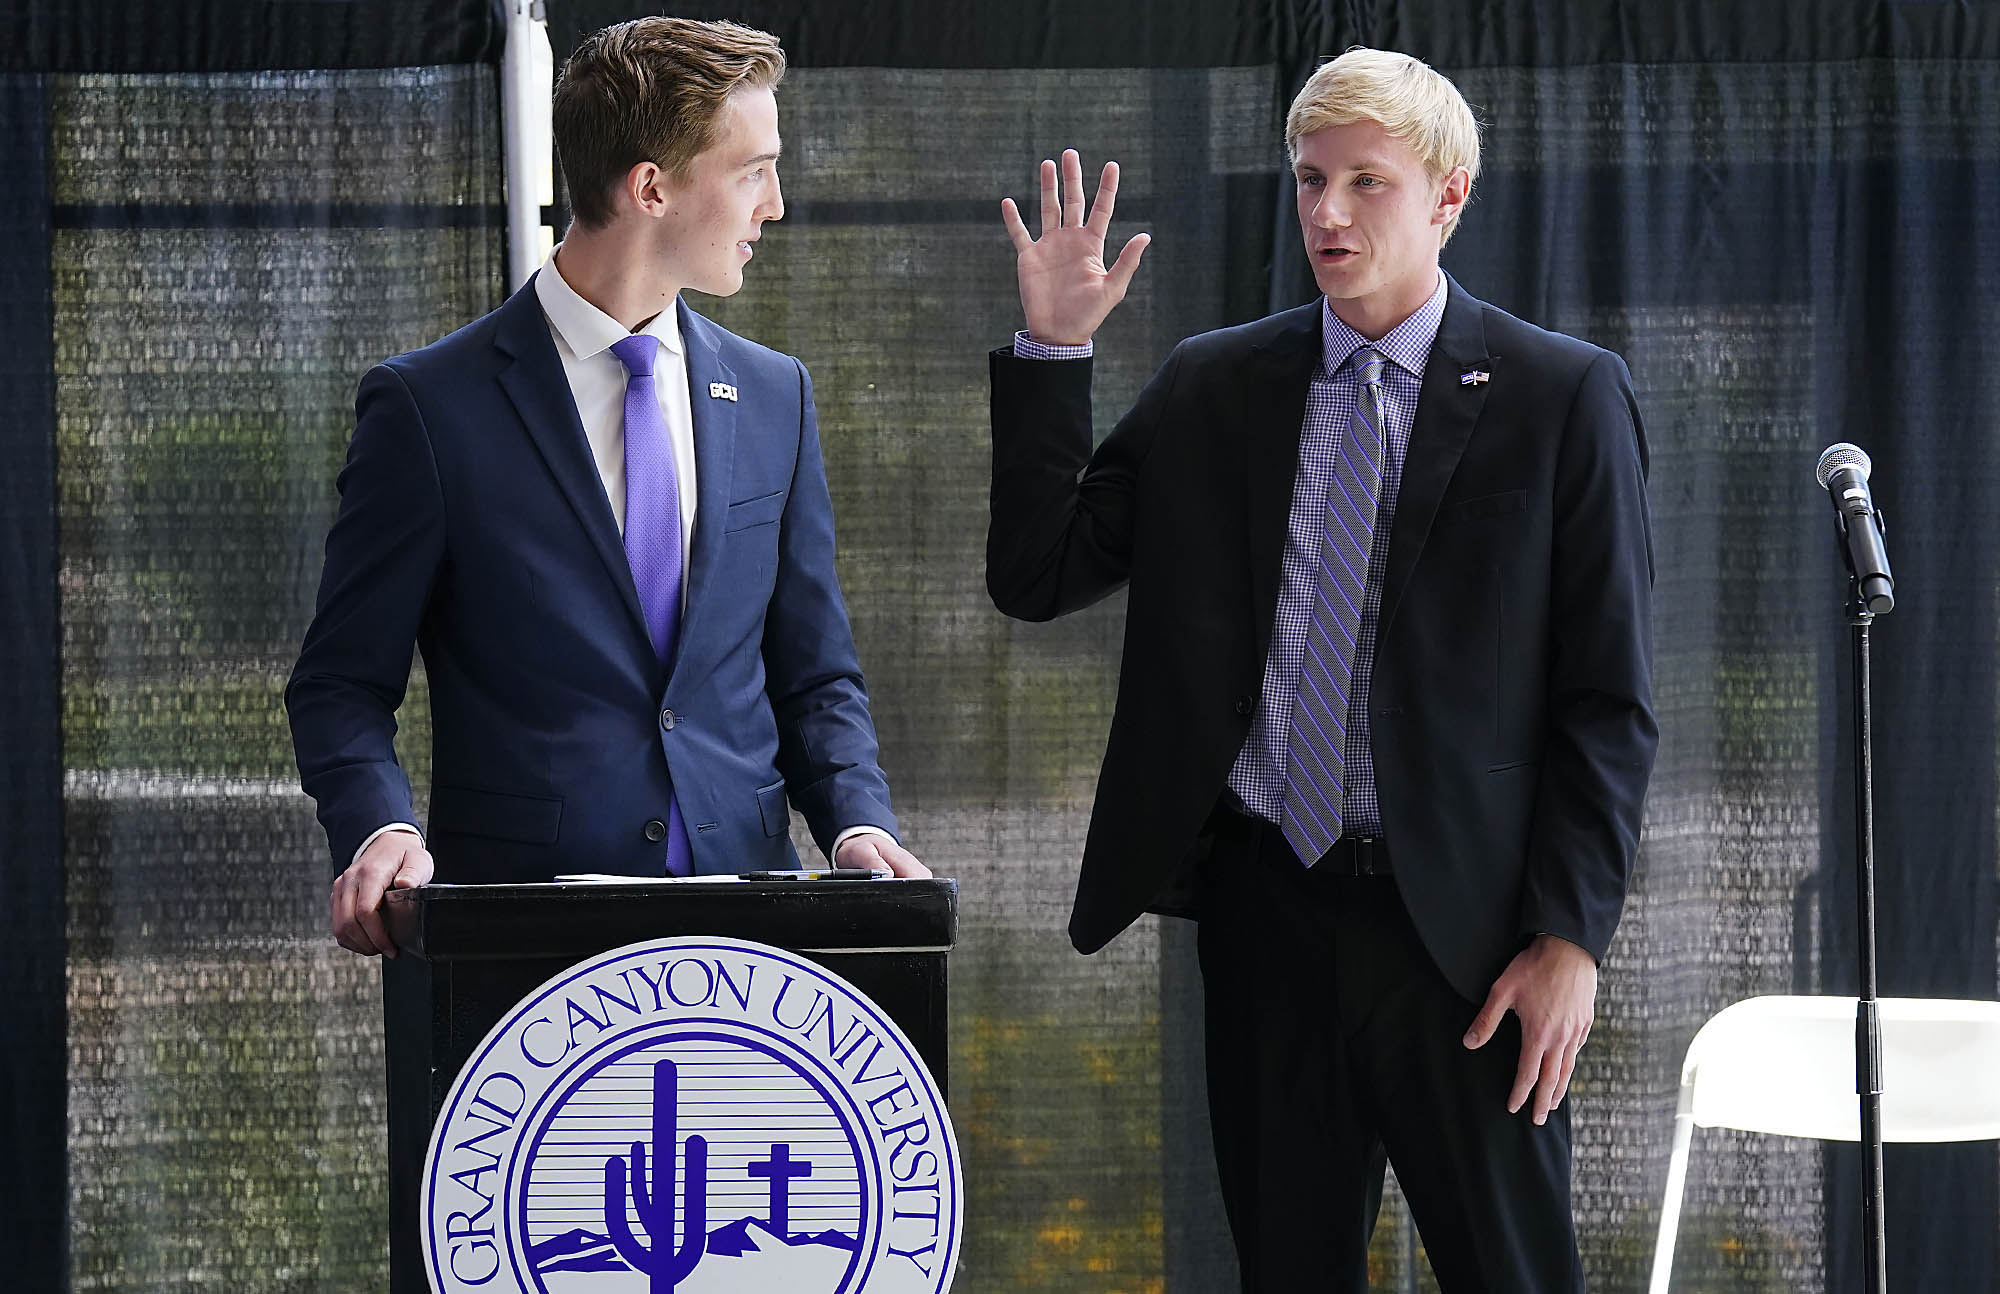  New student body leaders take oath at inauguration 